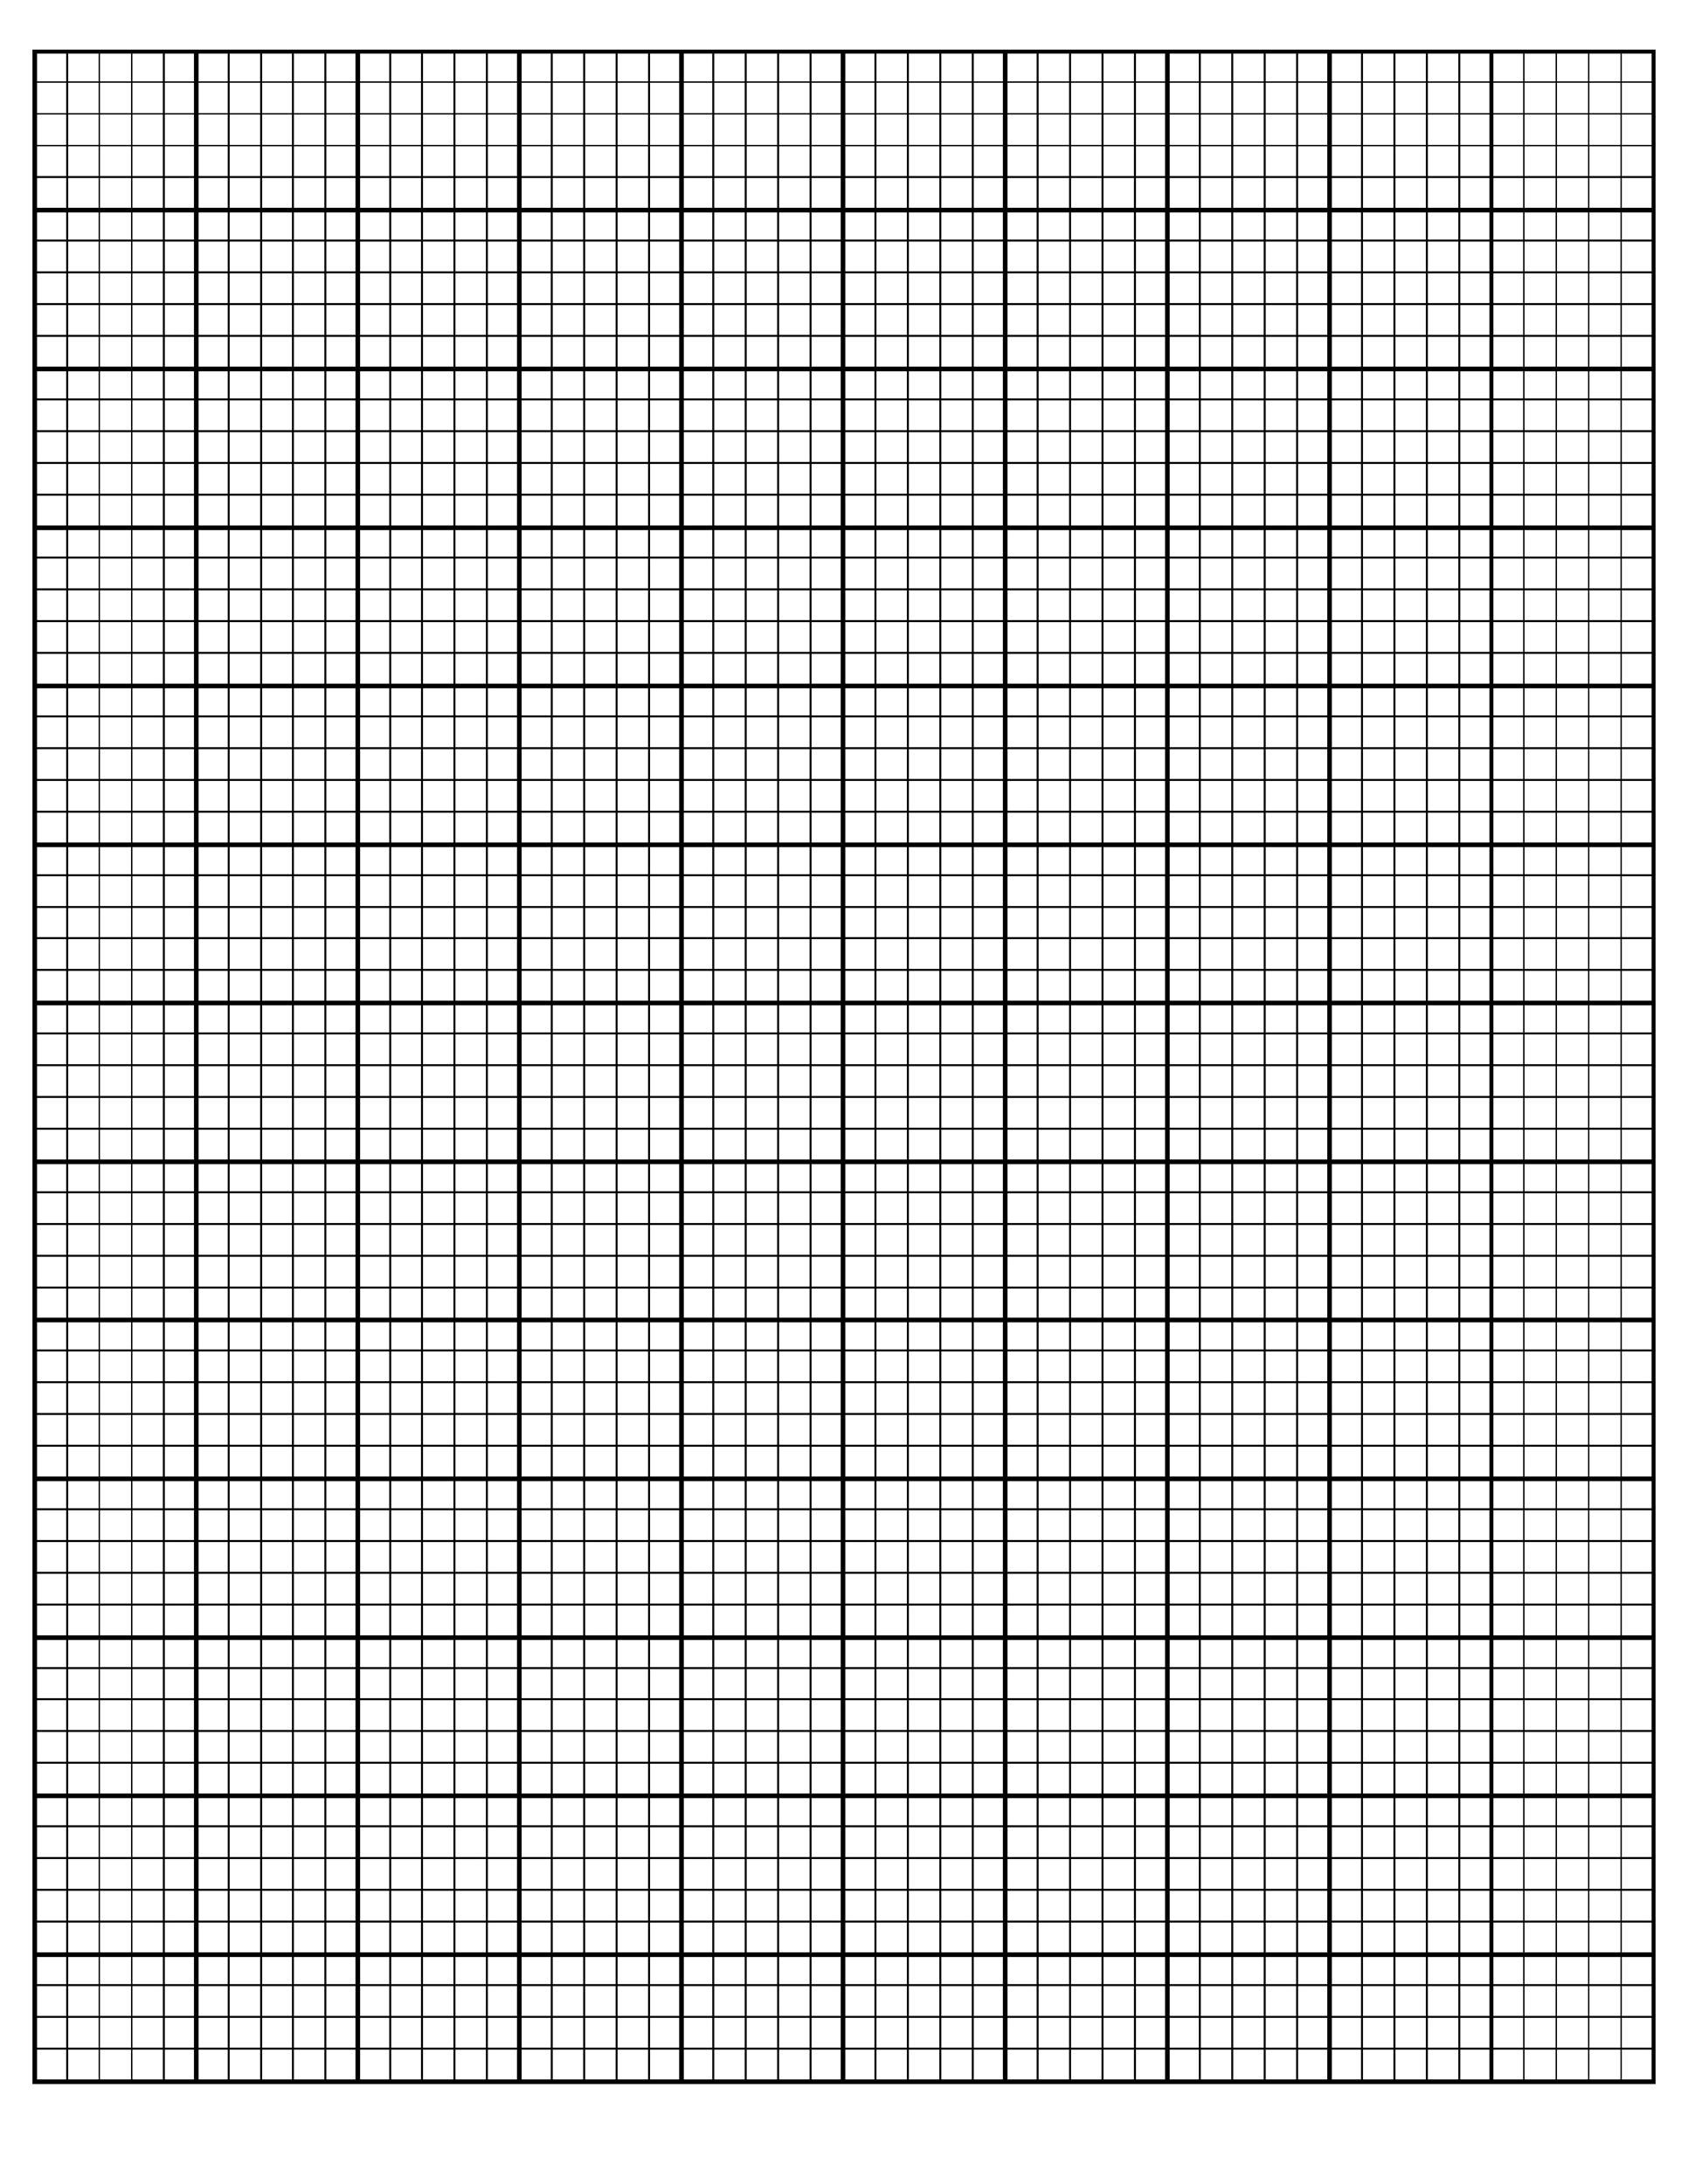 printable-blank-graph-paper-template-printable-graph-paper-online-shopping